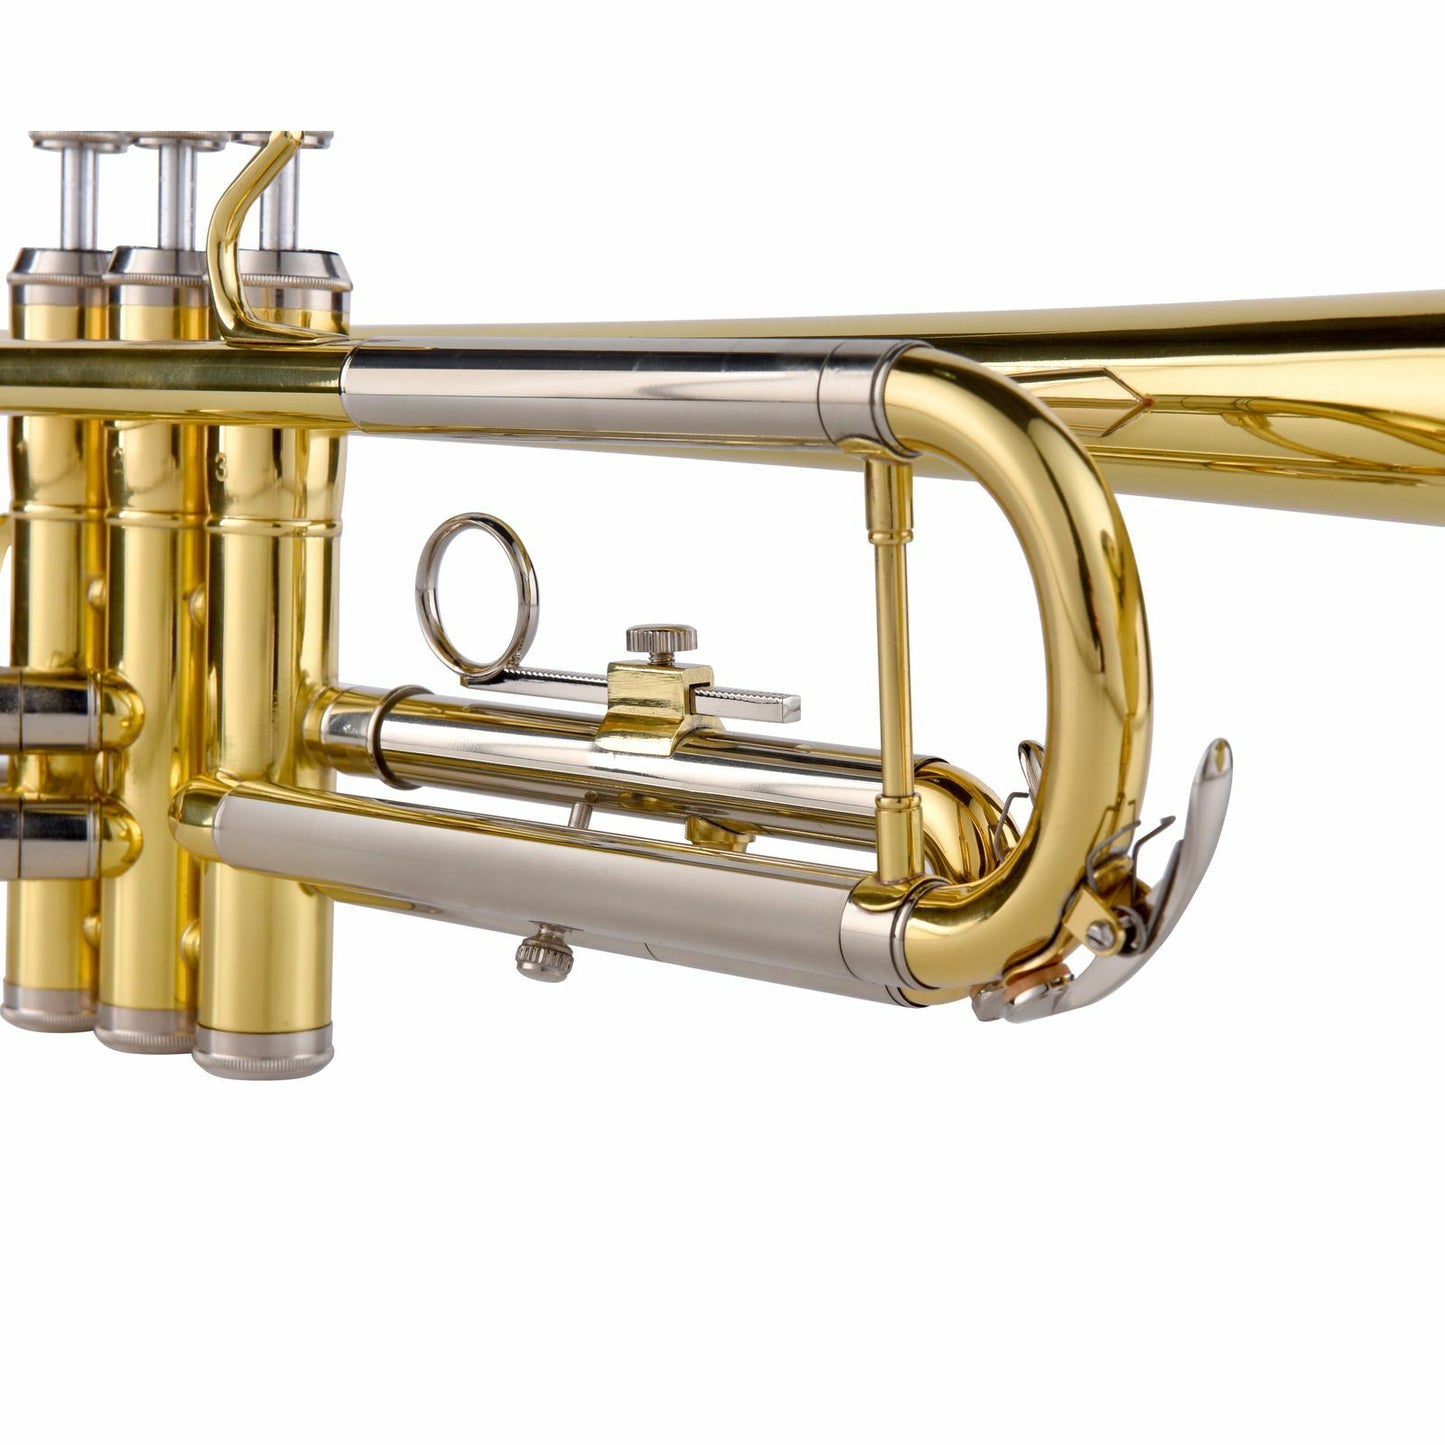 Axiom Concerto Trumpet Outfit - School Band